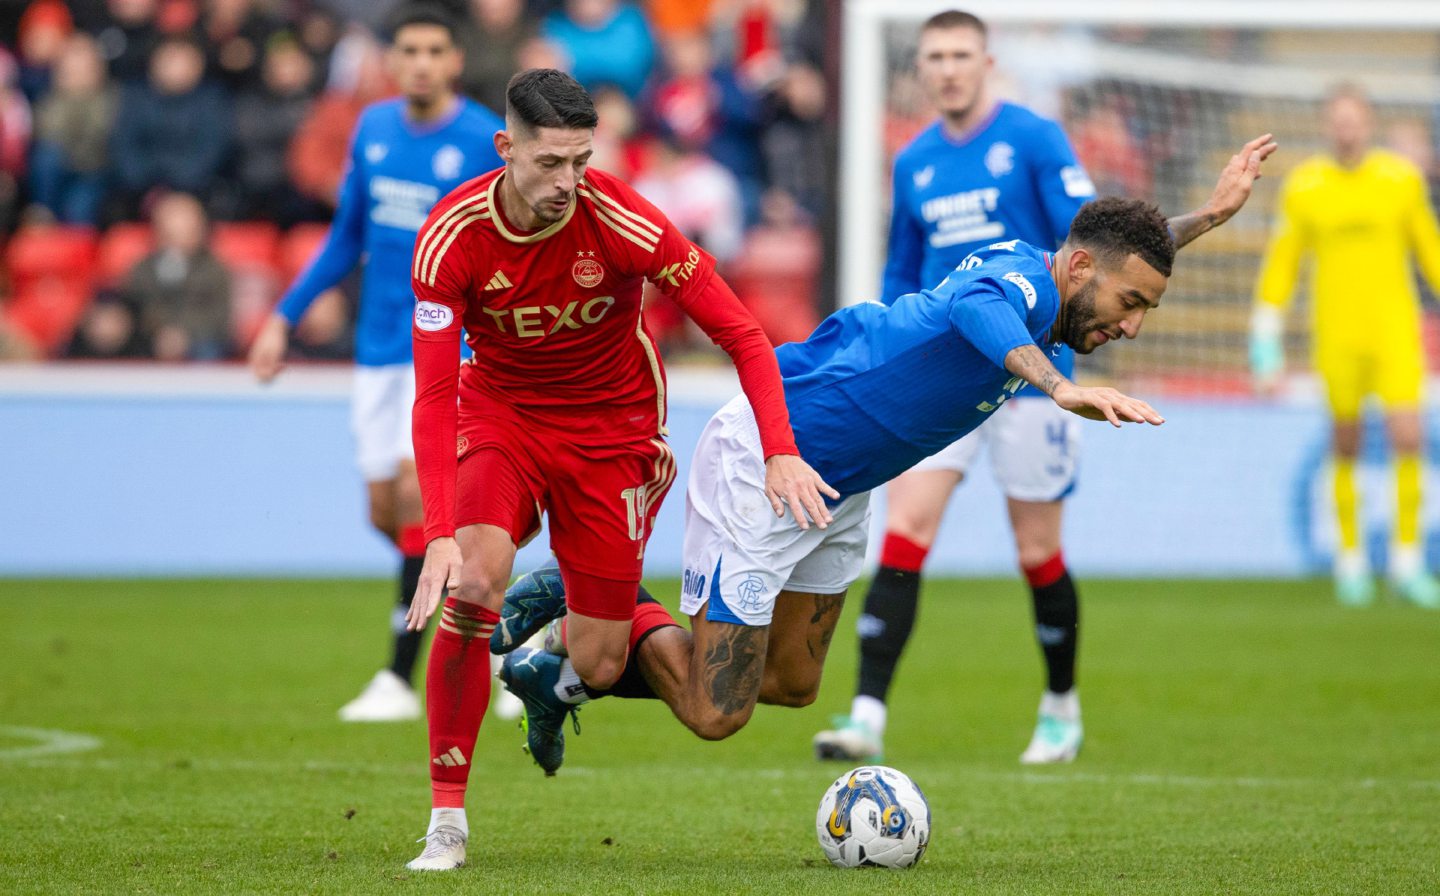 Aberdeen's Ester Sokler wins the ball from Rangers' Connor Goldson at Pittodrie on his first start for the Dons. Image: SNS 